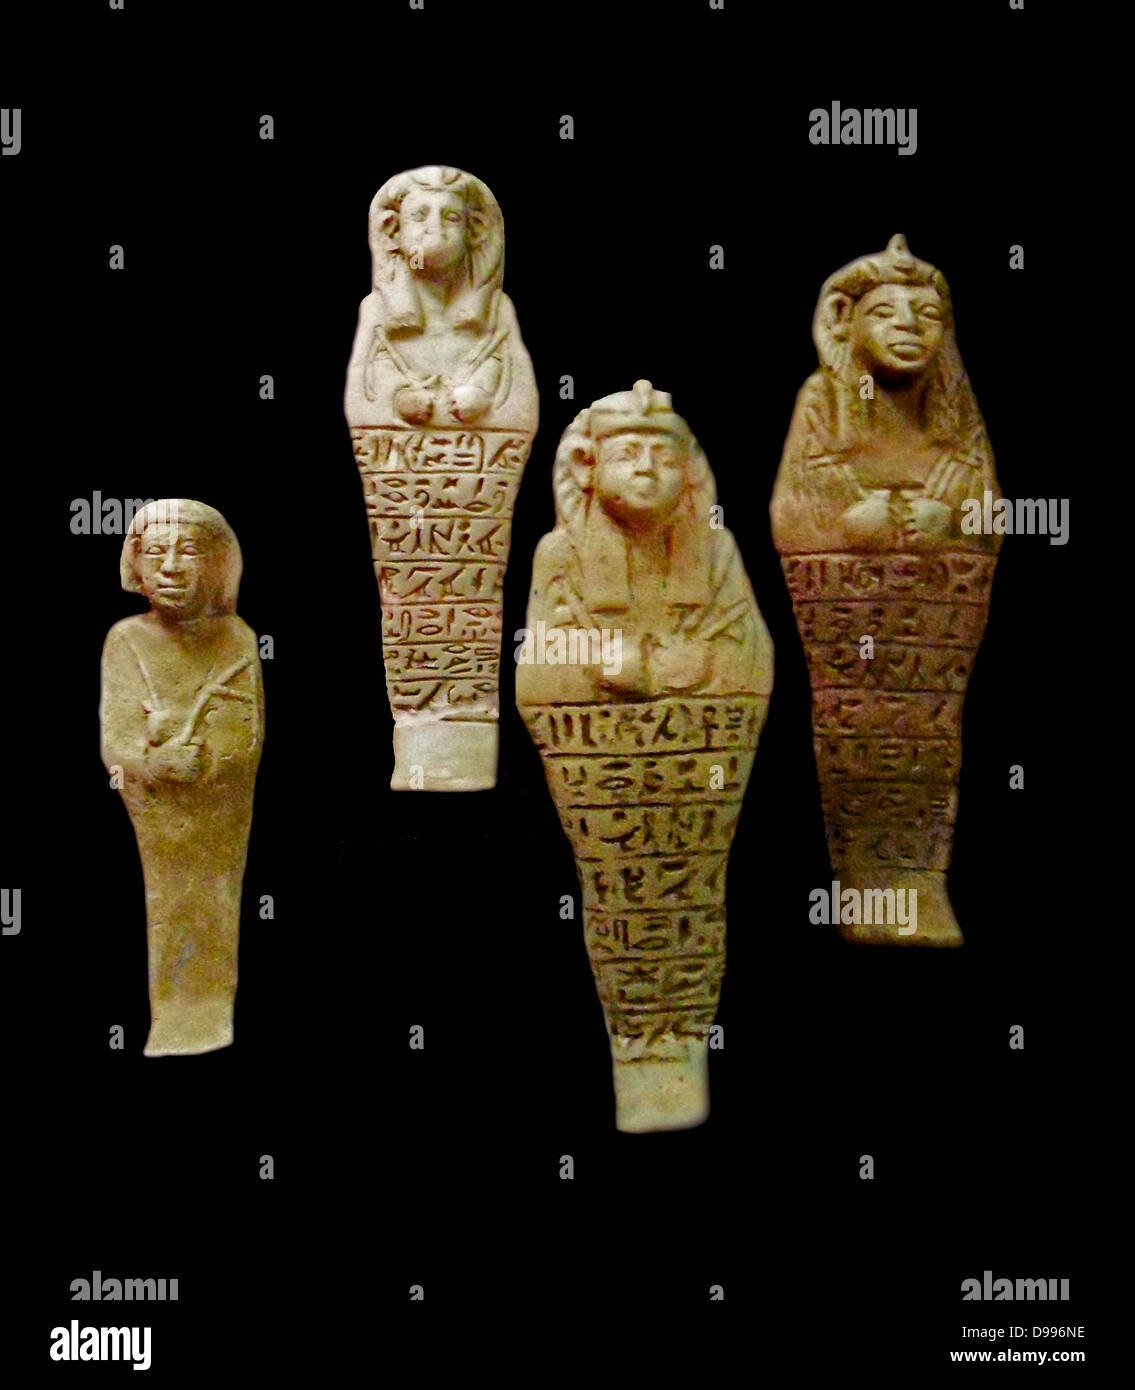 Shabti (Faience figures) from a Pyramid tomb in Egypt. The figures are from left to right: Queen Maleteral 643-623 BC, Queen Nasalsa 593-568 BC, Queen Madiken 593-568 BC, and Queen Artaha 593-568 BC Stock Photo